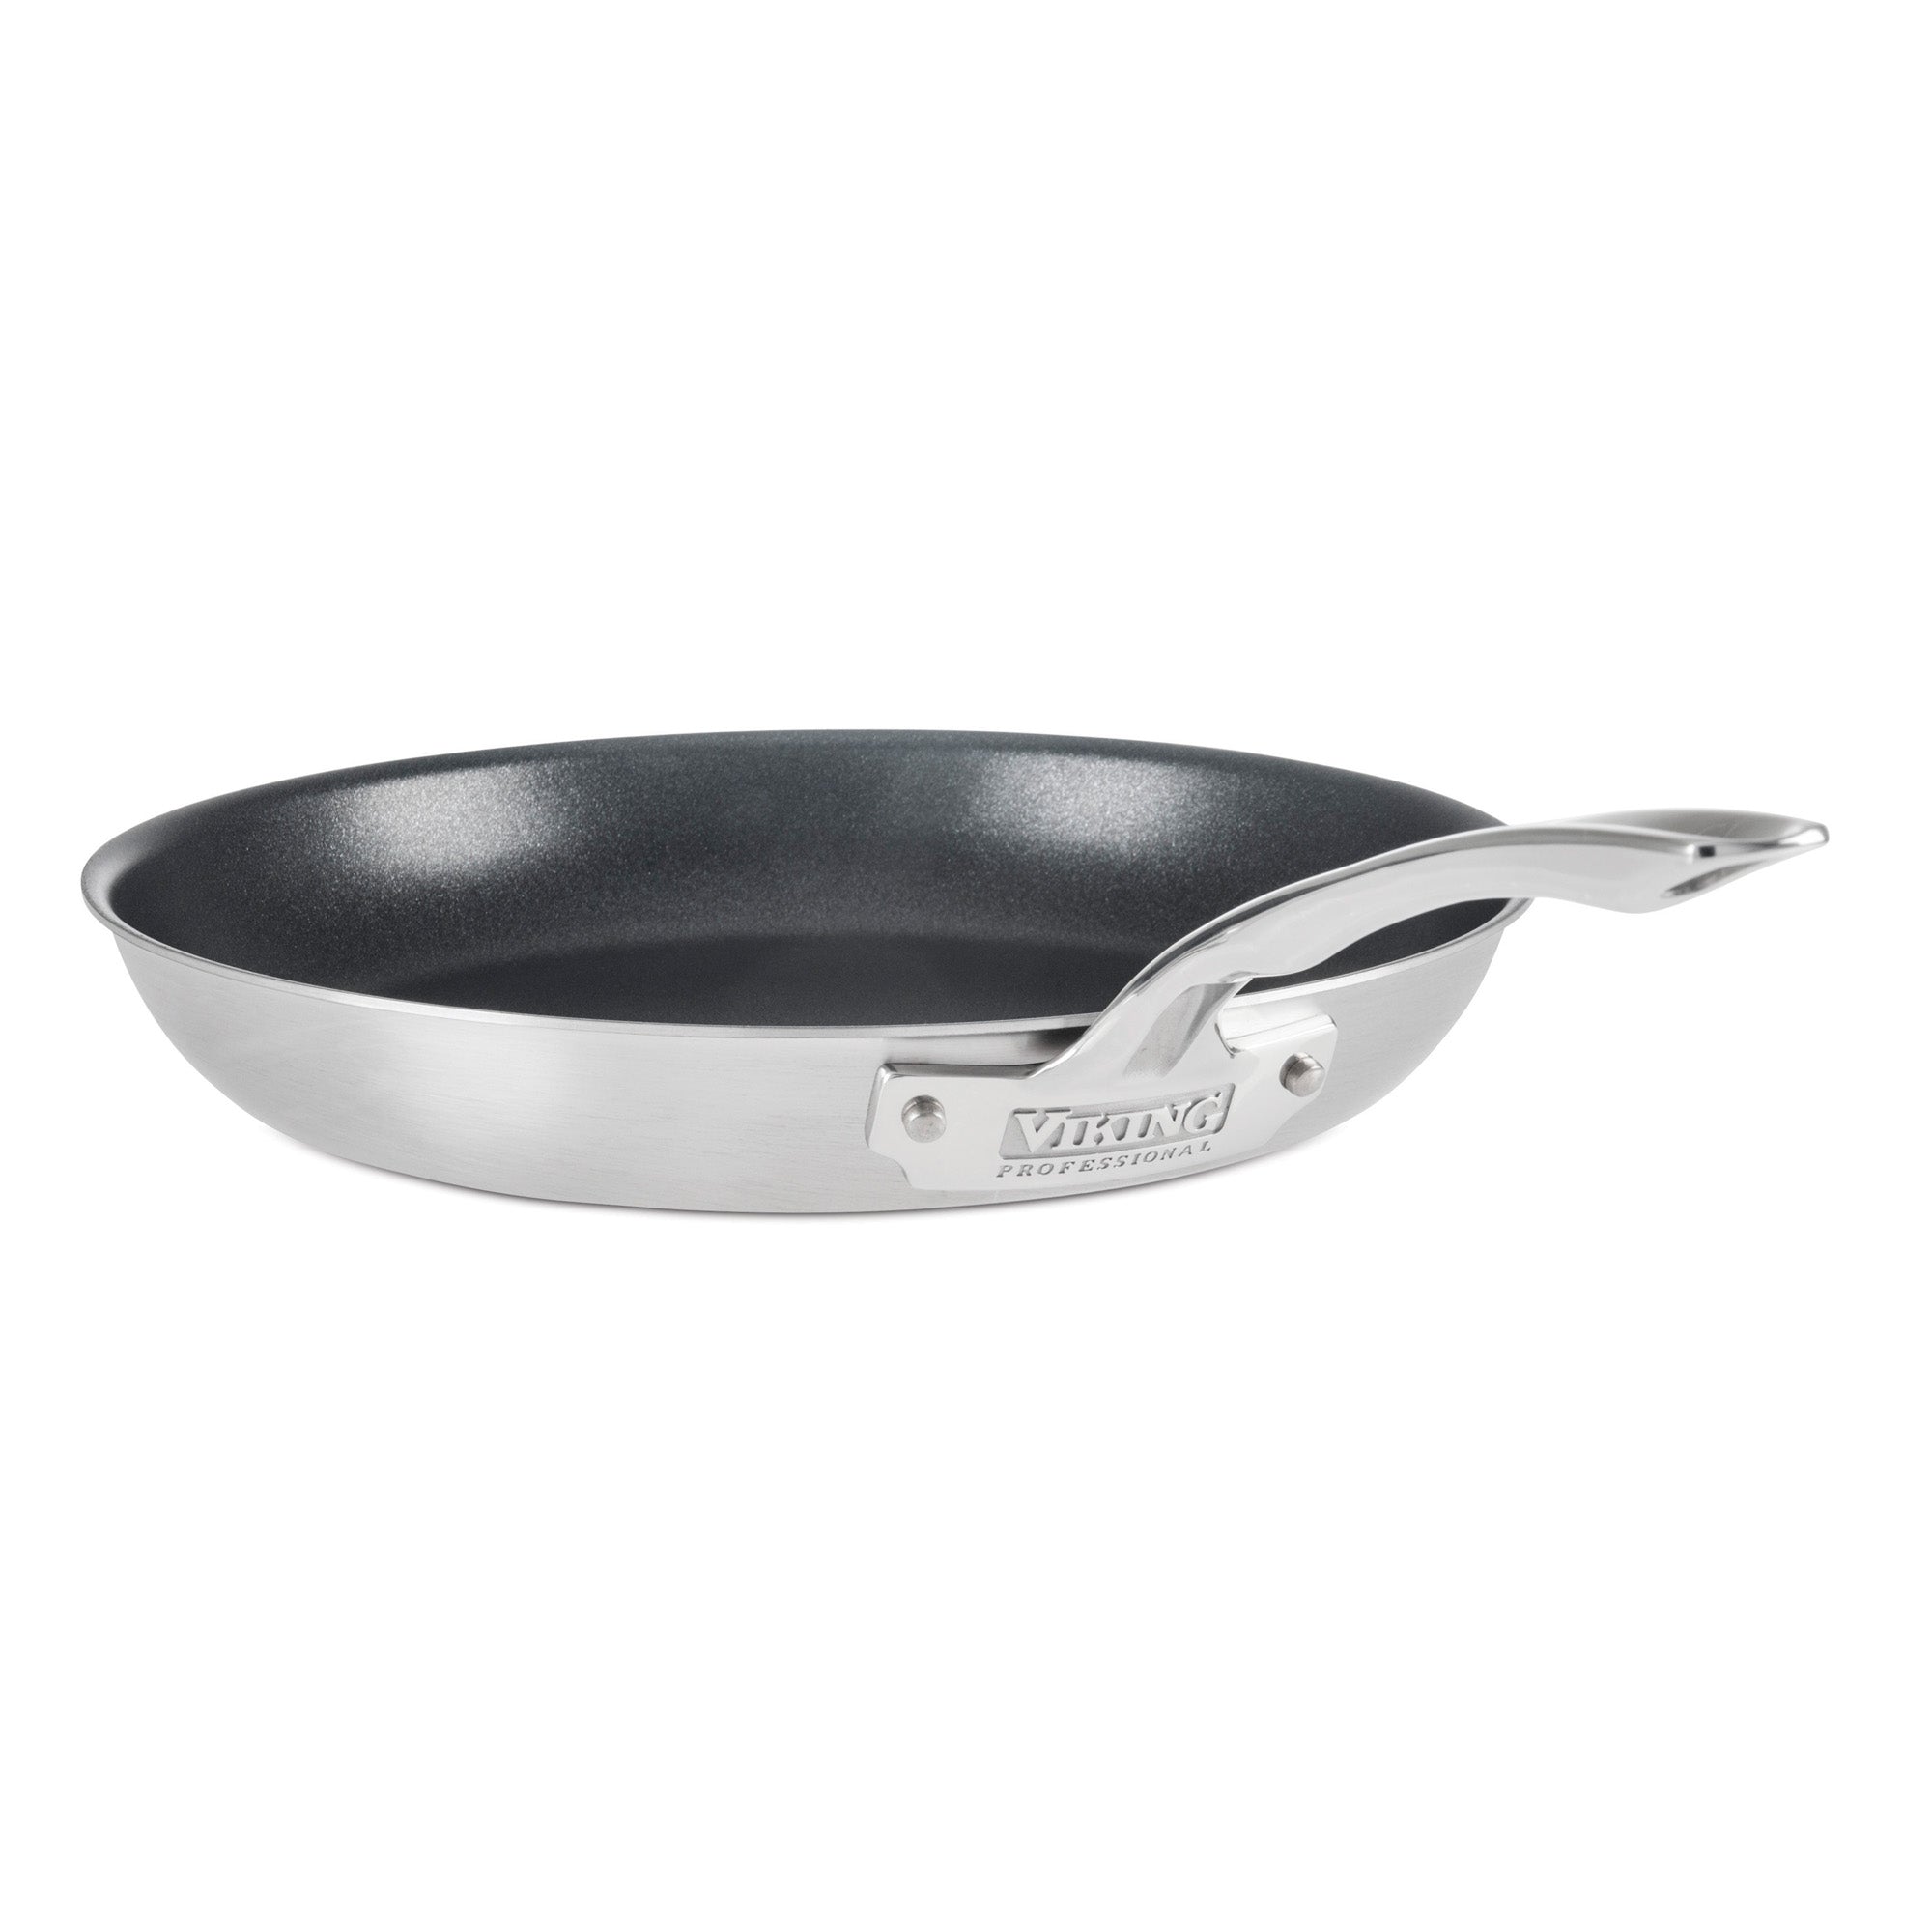 Viking Professional 5-Ply Stainless Steel Covered Nonstick 12-Inch Fry Pan